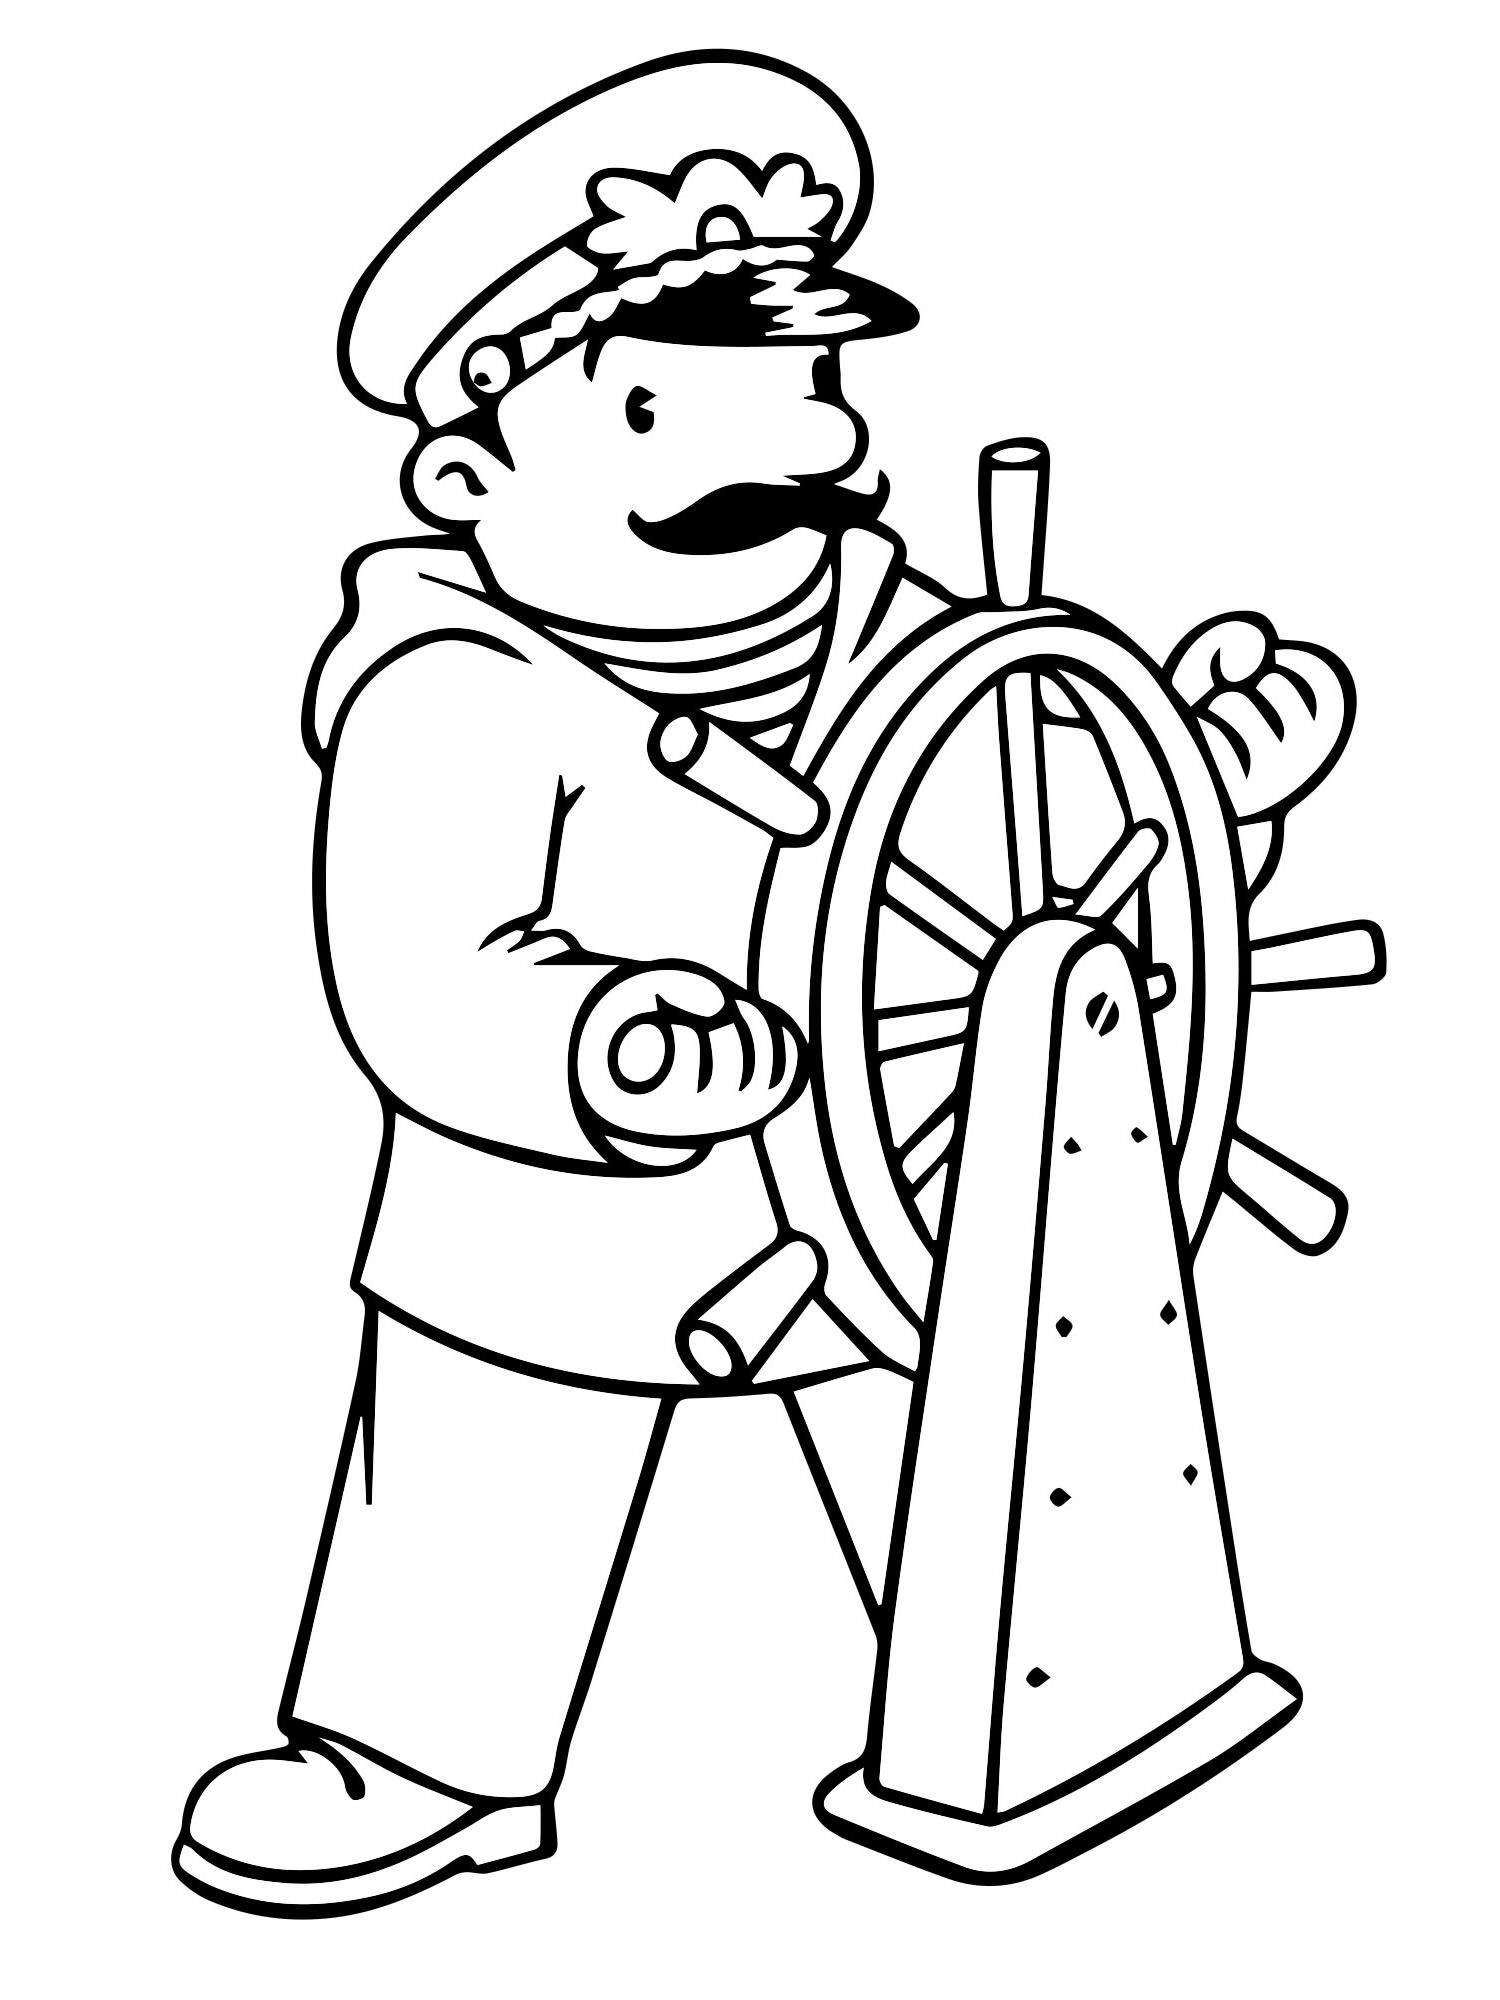 Swimming coloring pages